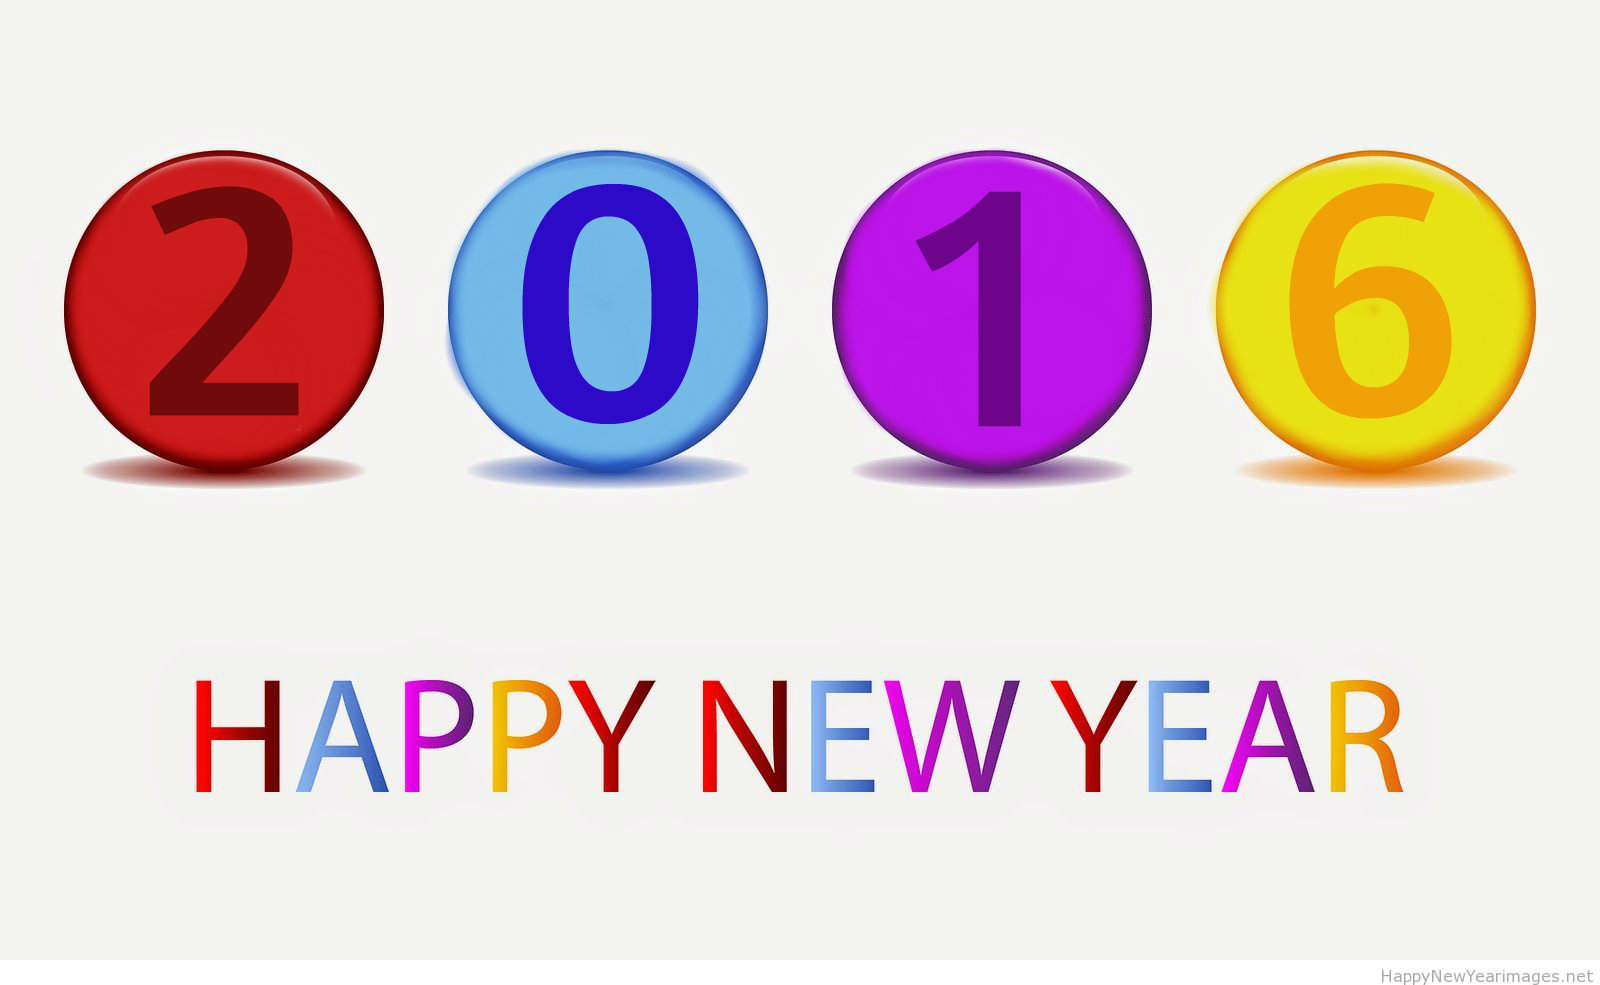 new year wishes clipart - photo #19